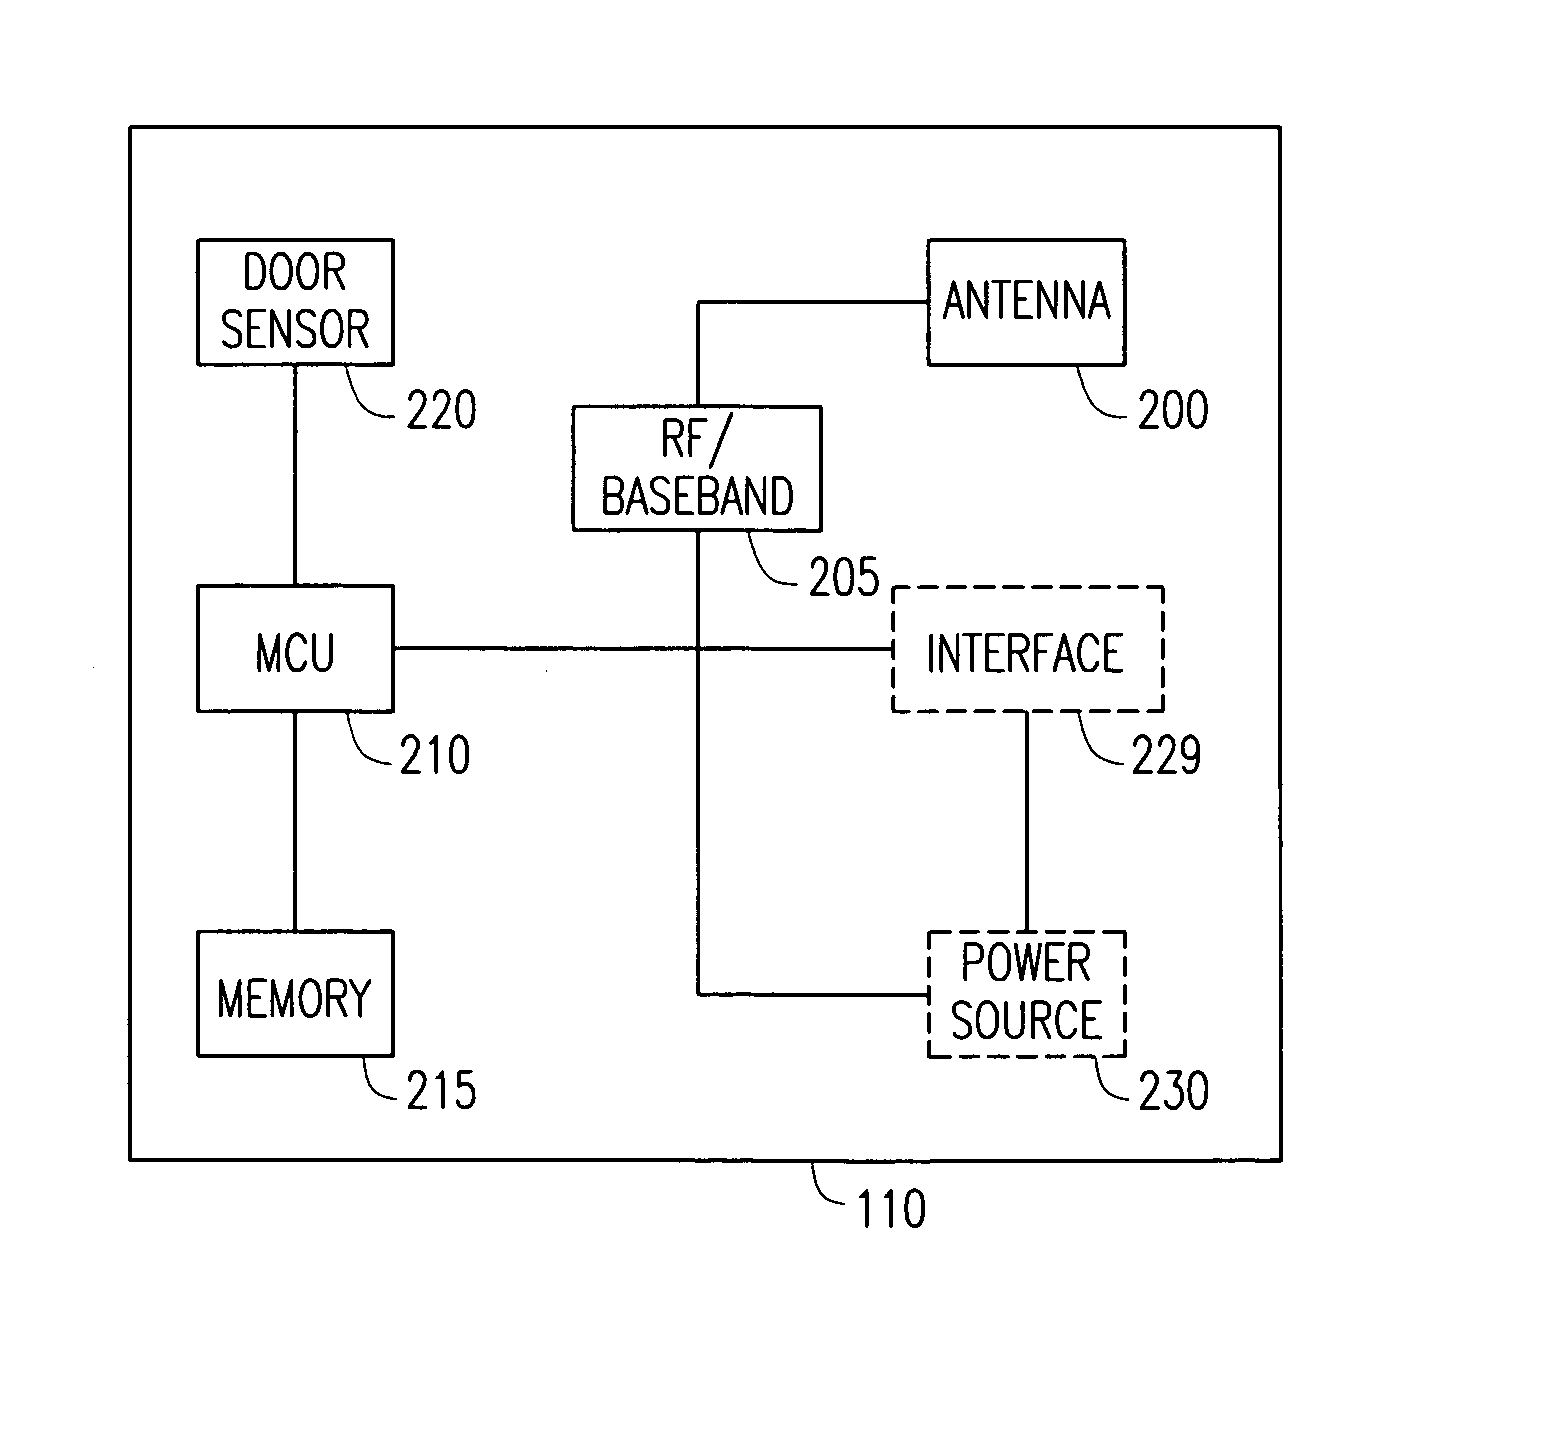 Method and system for arming a container security device without use of electronic reader